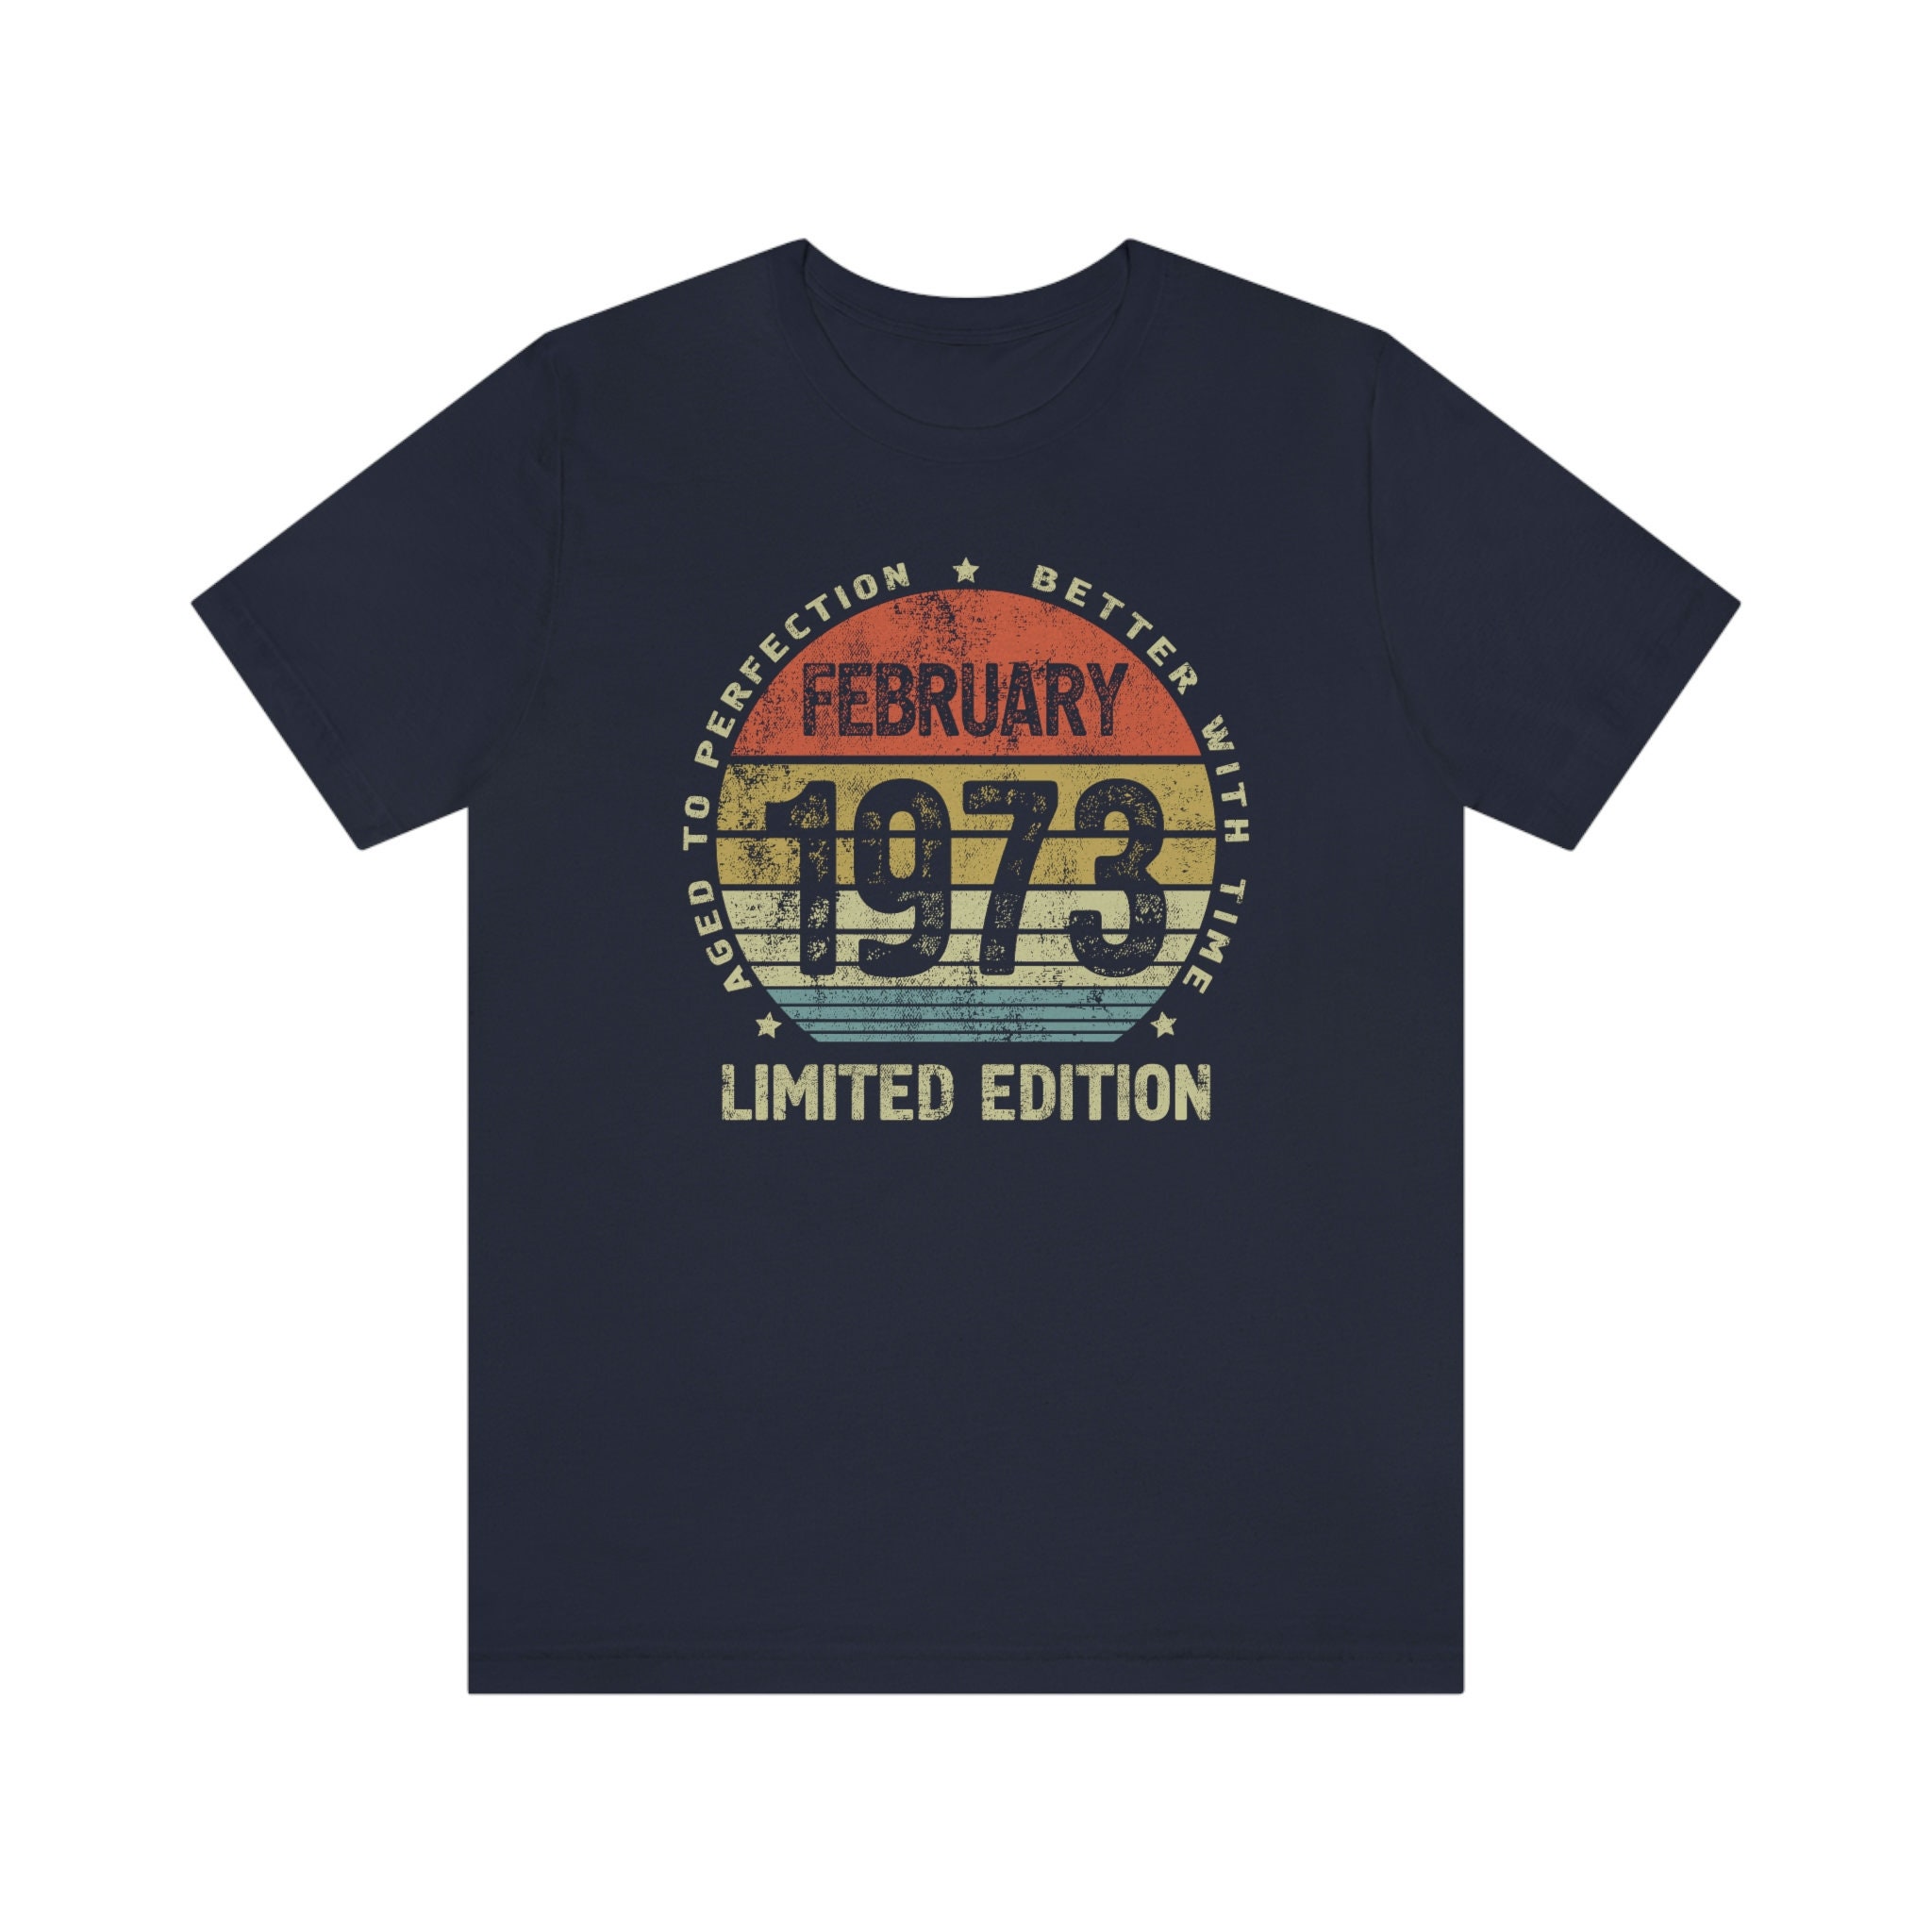 Discover 50th birthday gifts for women or men, February 1973 birthday T-Shirt